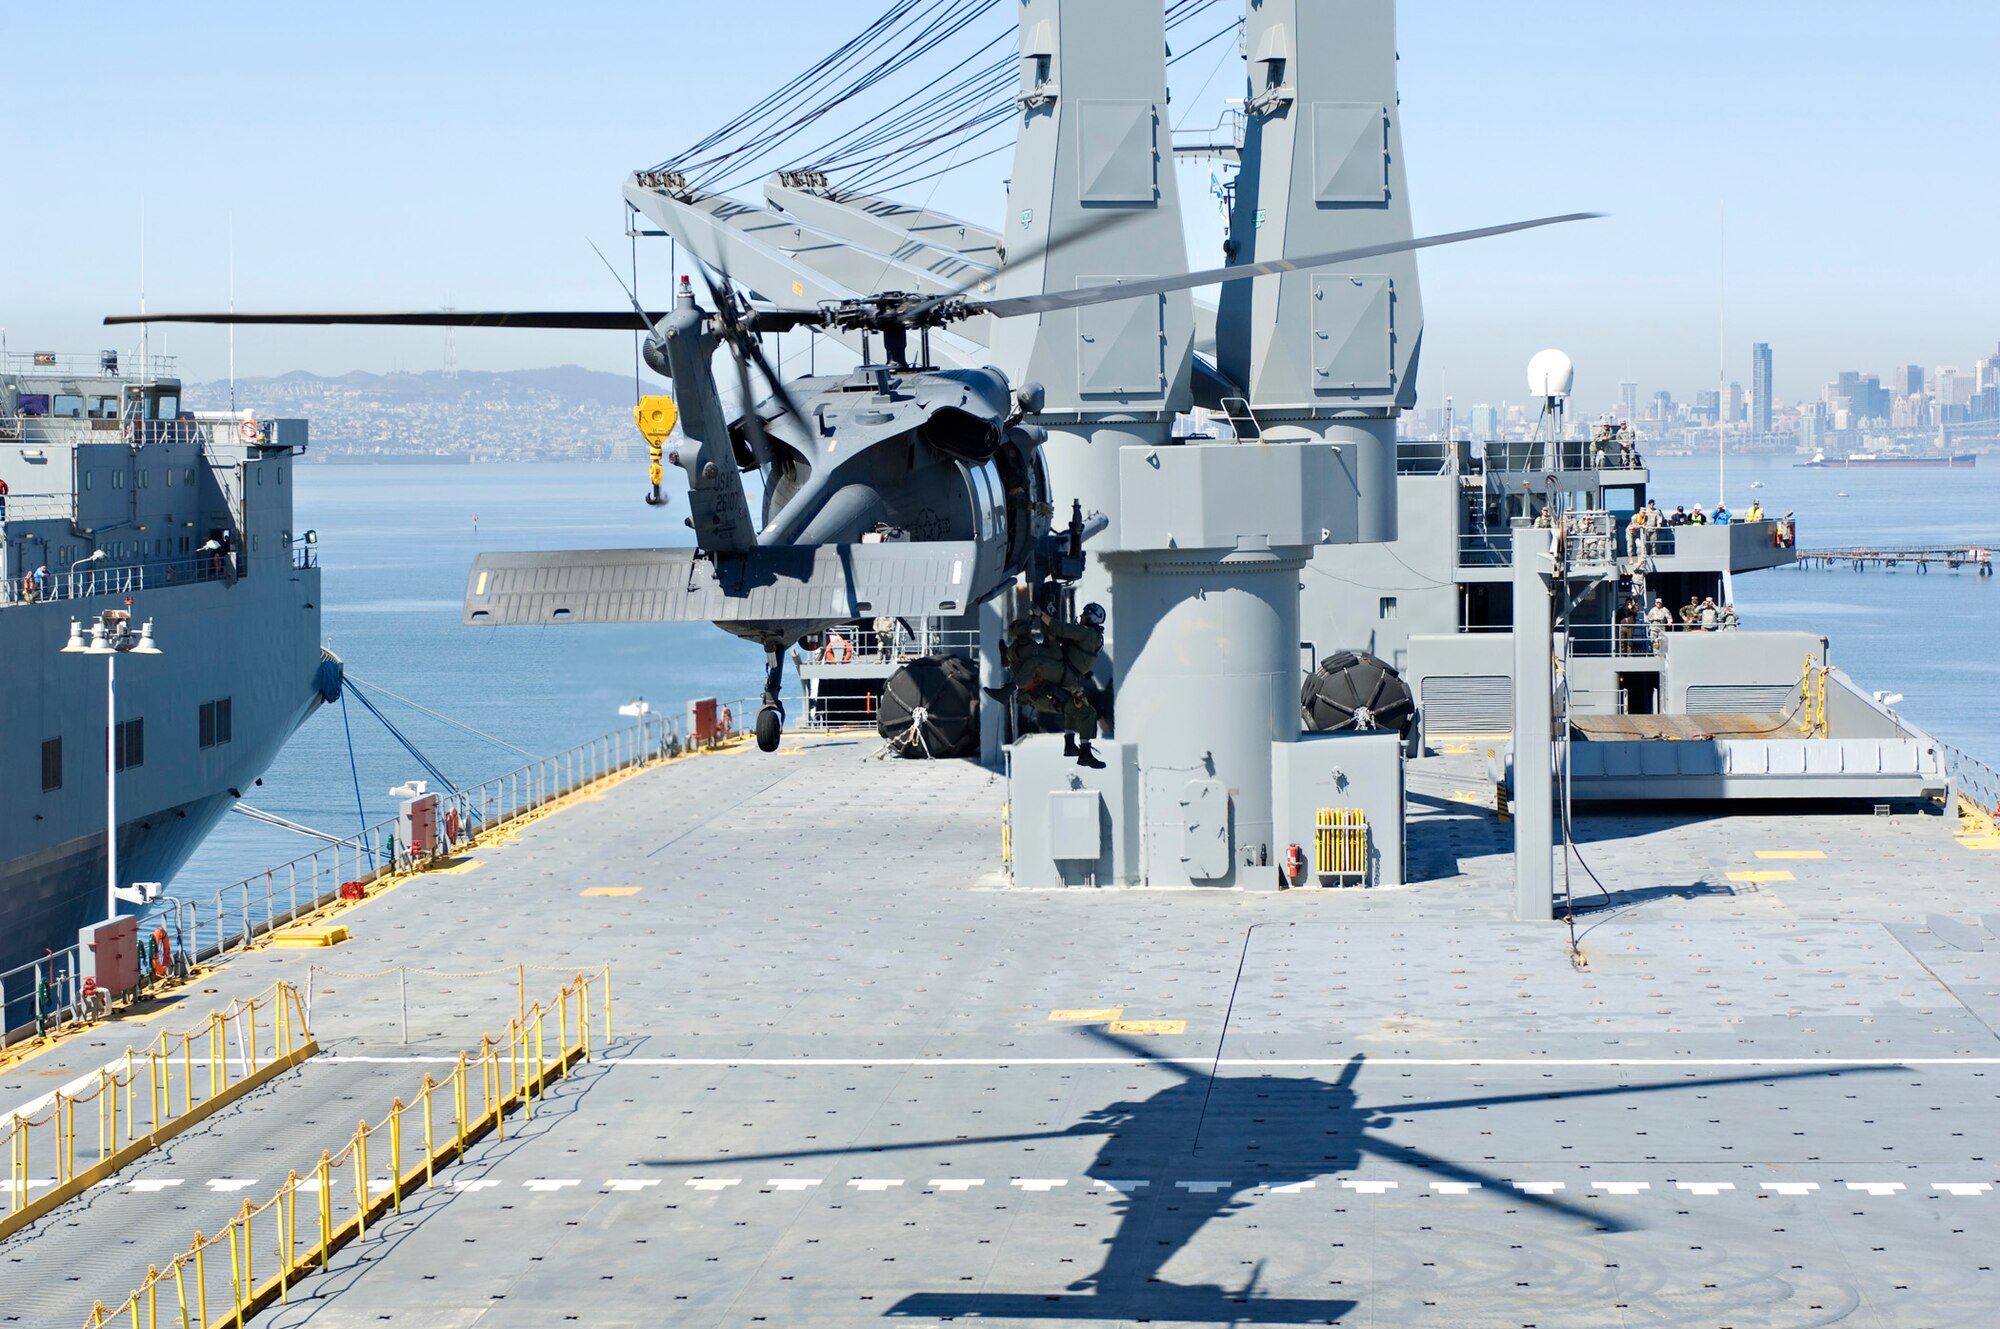 An HH-60G Pave Hawk from the 129th Rescue Wing hovers over the USNS Algol as it hoists down pararescueman Tech. Sgt. Michael Bendle and a federal agent during a full-scale local exercise at Alameda Point, Calif. April 17. (U.S. Army photo by CW3 Jon-Nolan Paresa)